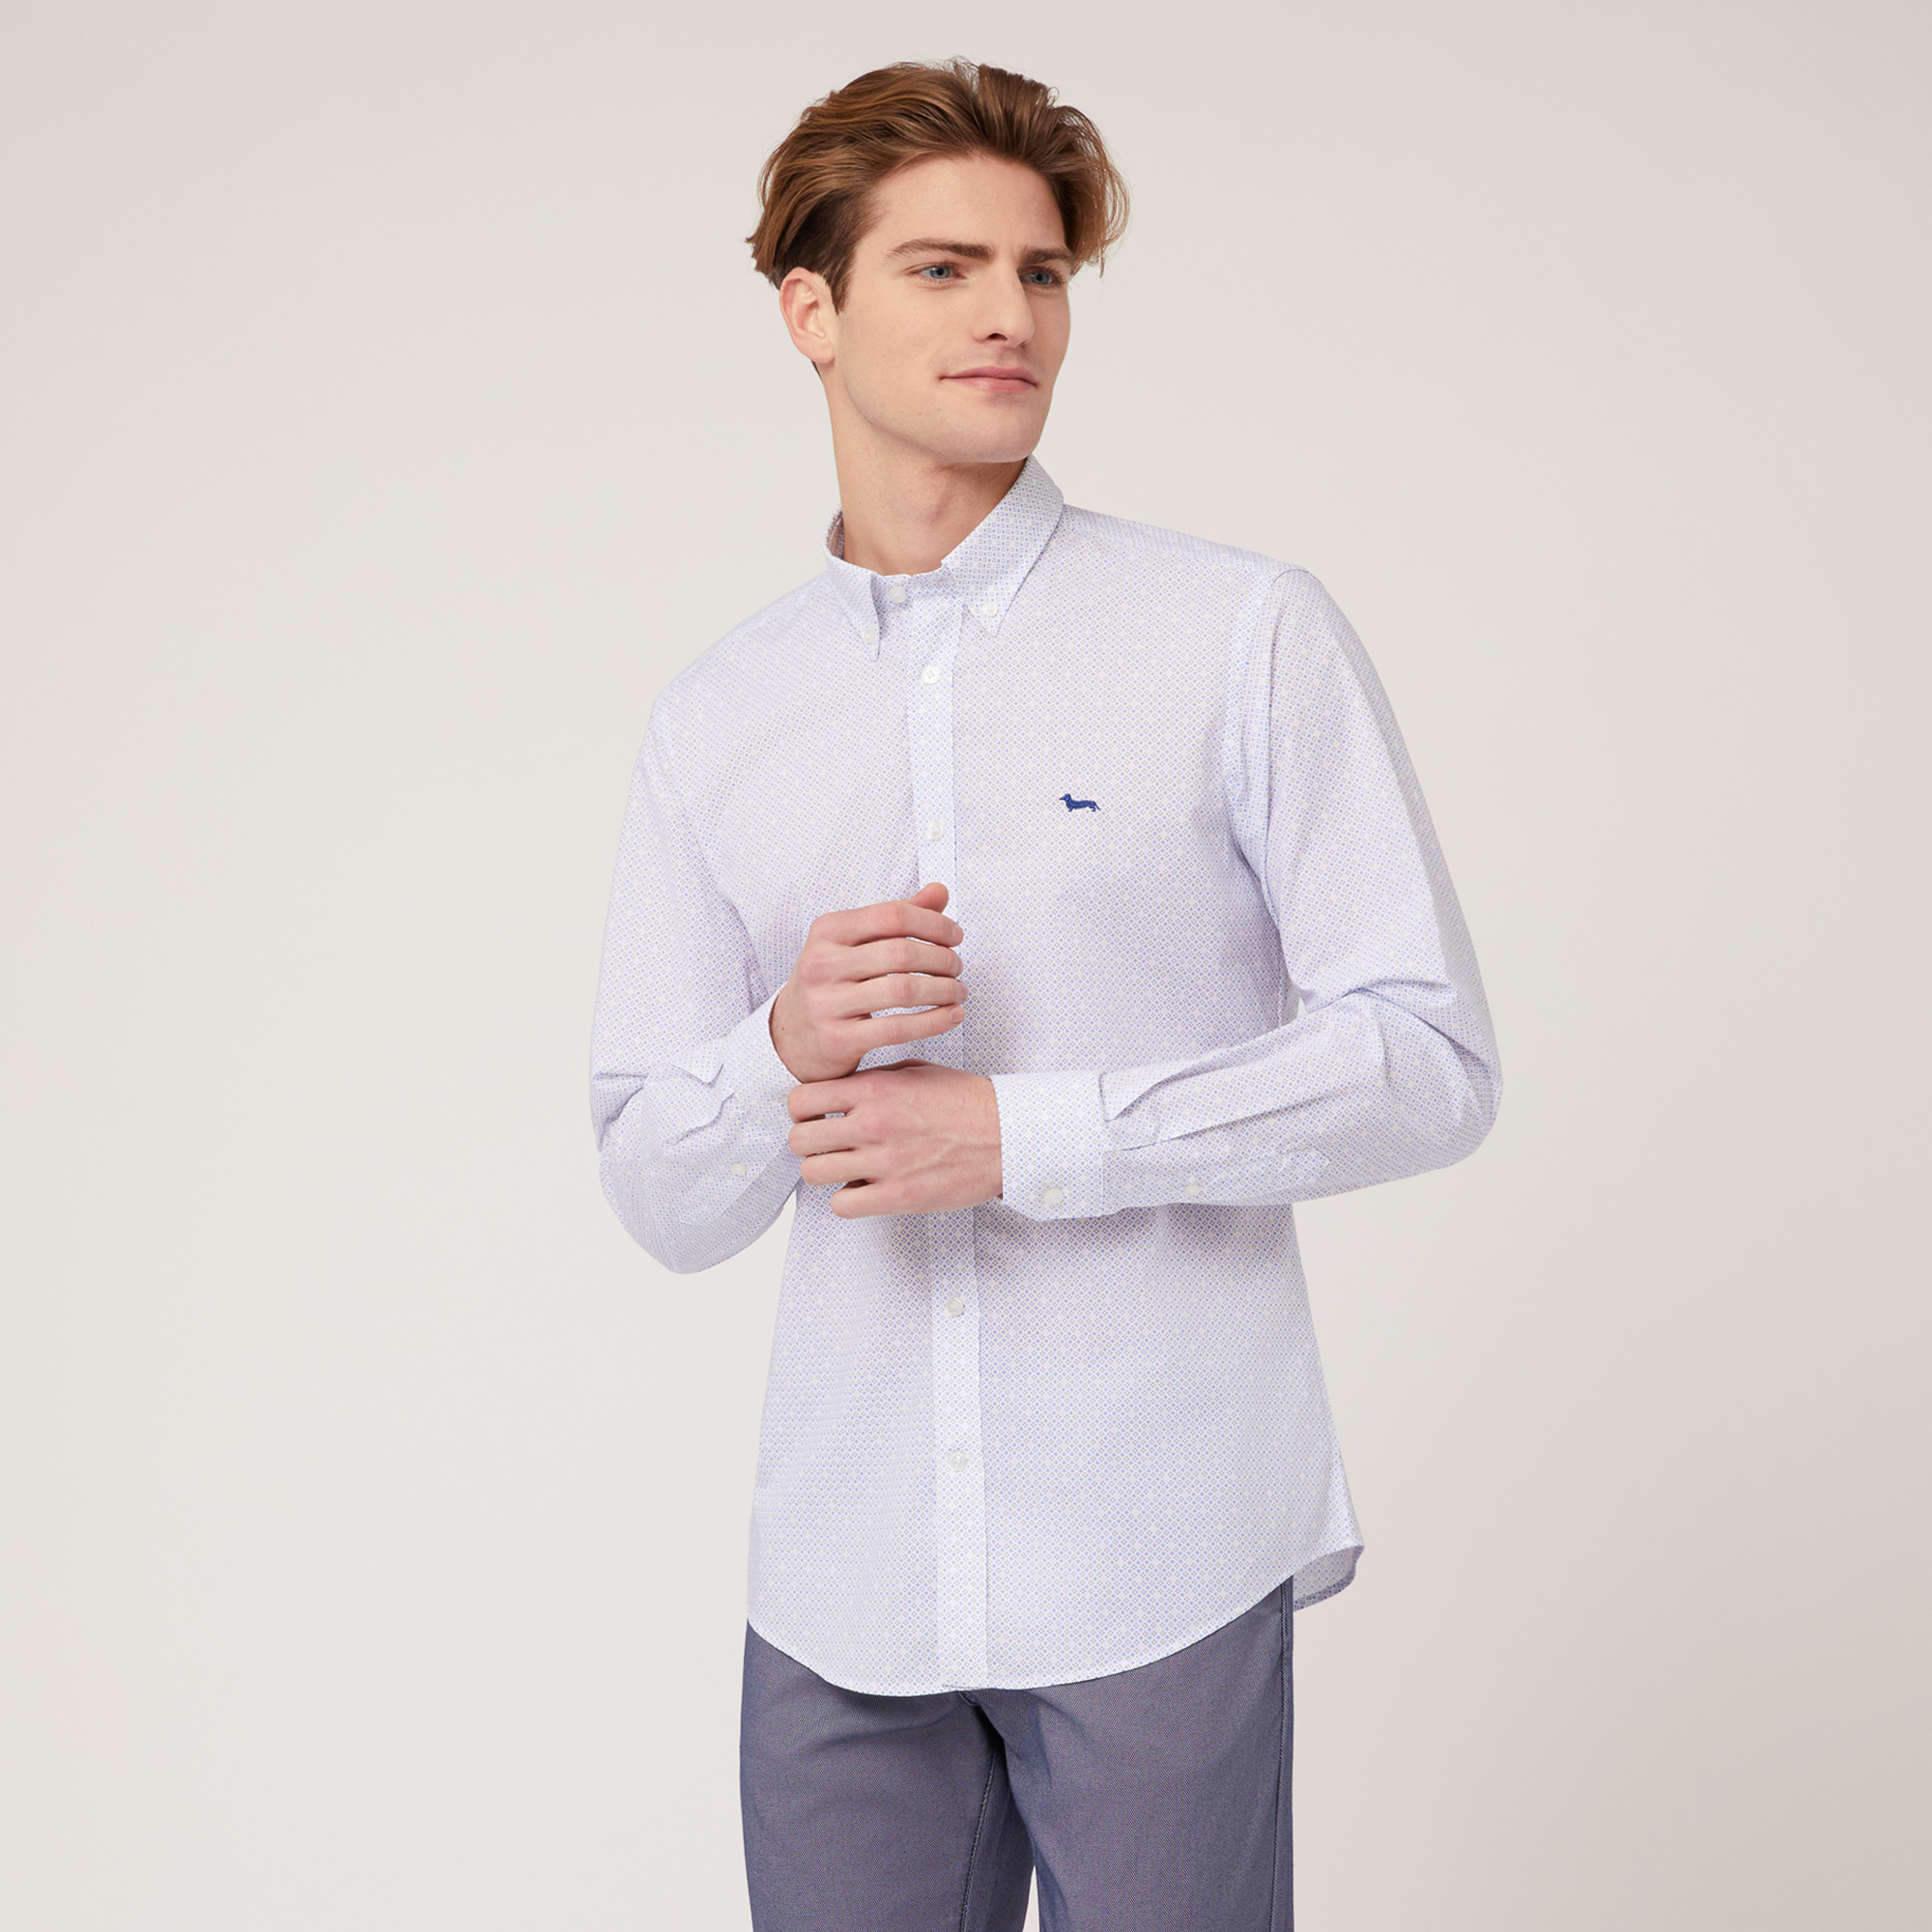 All-Over Micro Pattern Shirt